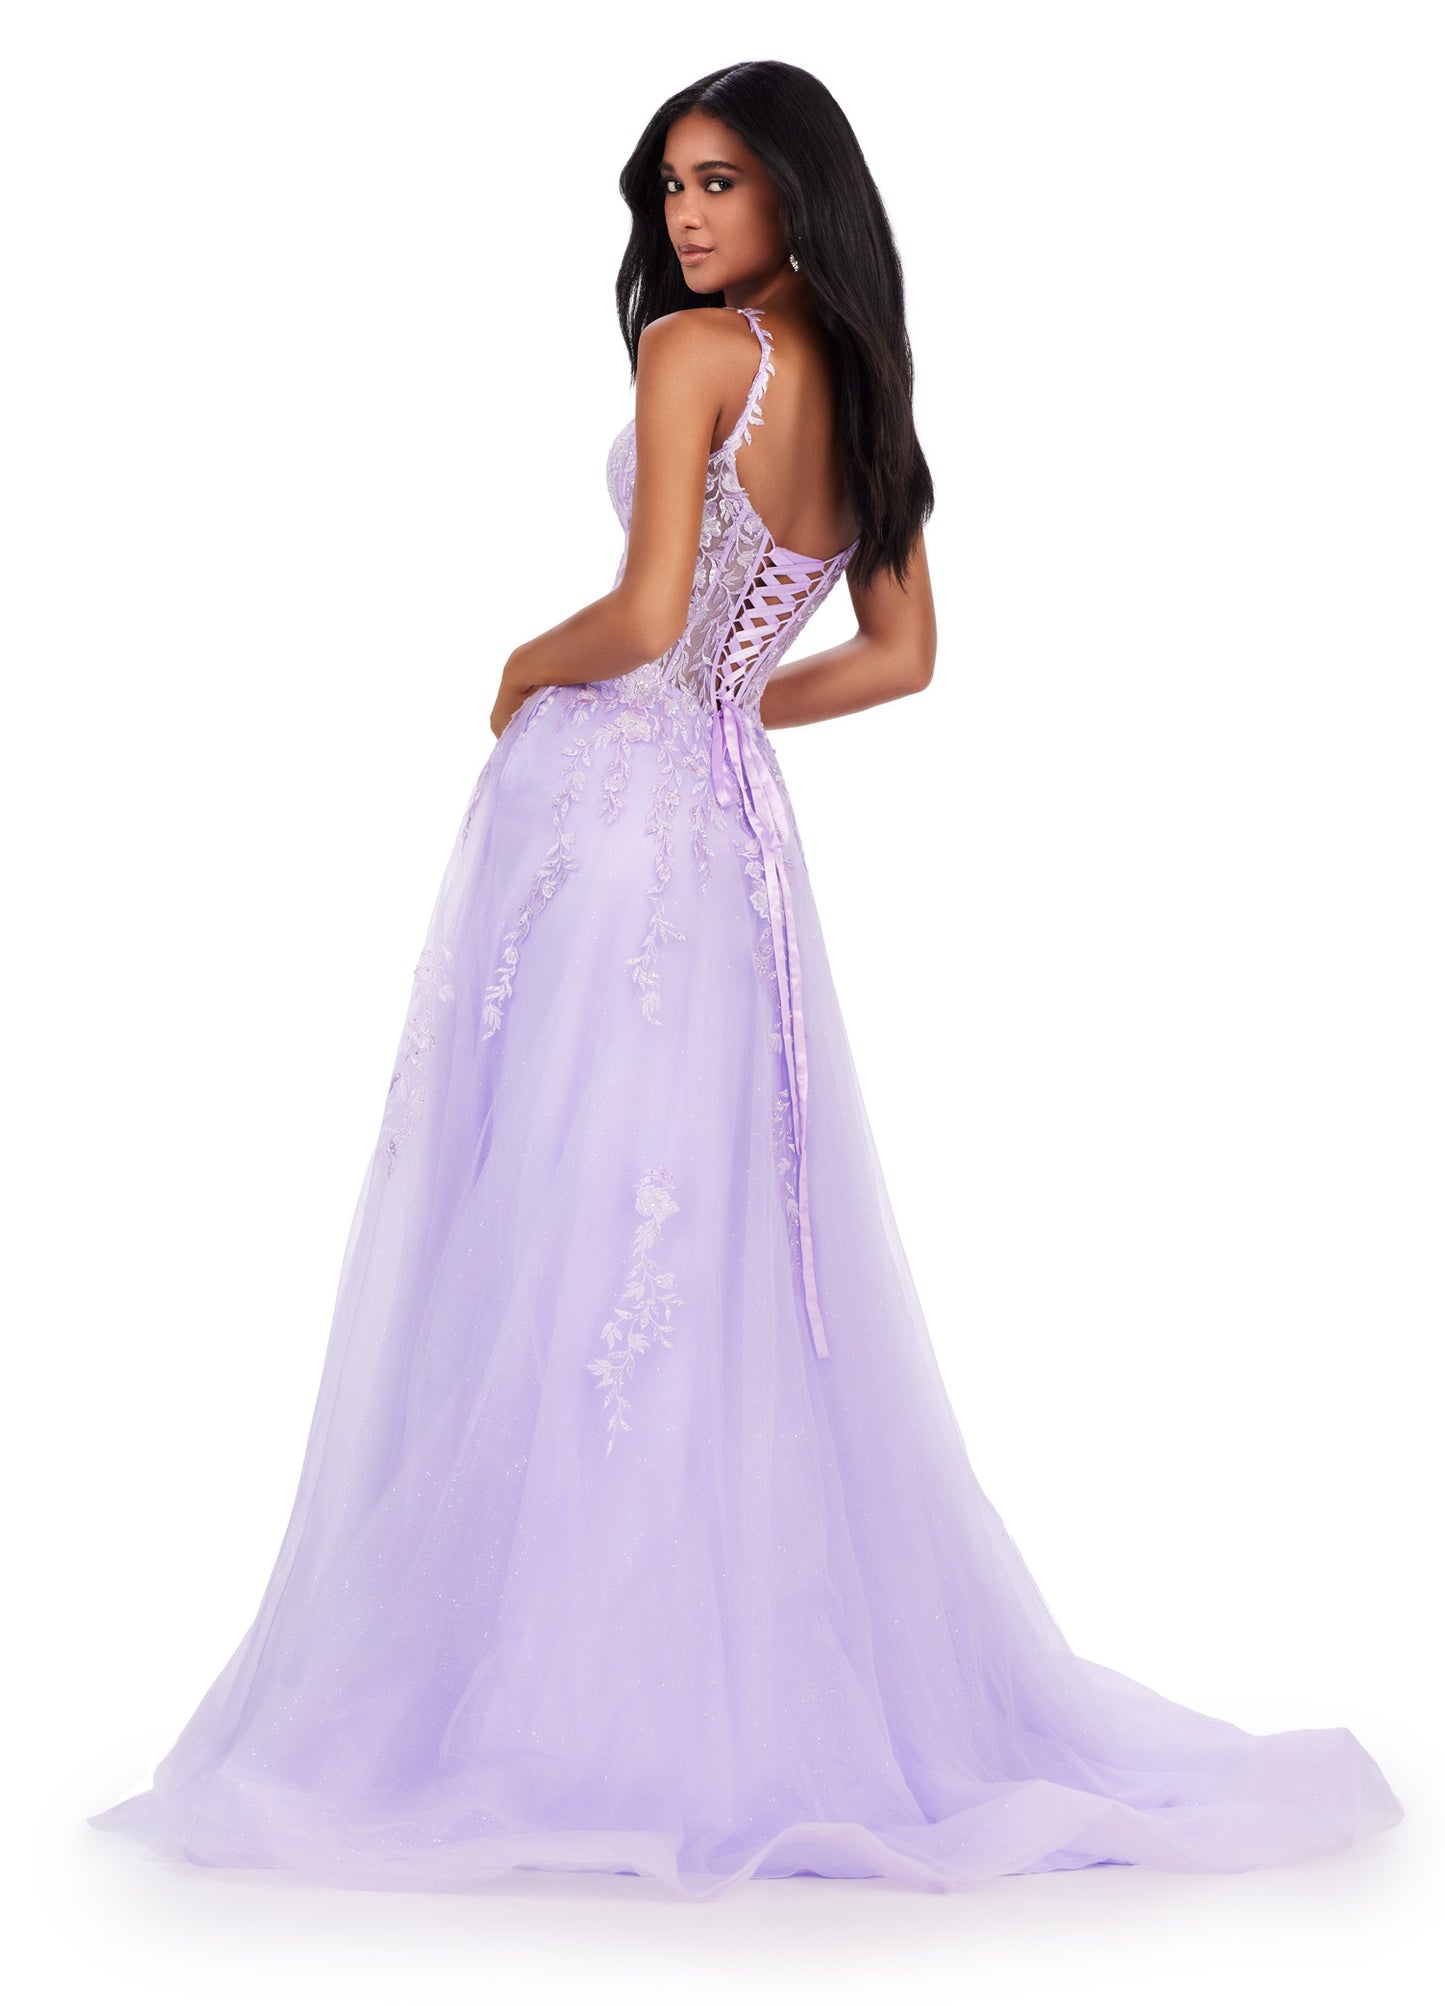 Step into the spotlight in the Ashley Lauren 11526 Long Prom Dress. Featuring spaghetti straps, a V-neckline, and a glitter tulle skirt, this gown is perfect for any formal event or pageant. With its elegant design and flattering silhouette, you'll feel like a star all night long. Living in a fairytale! This spaghetti strap gown features a v neckline with a lace applique bodice. The lace up back and glitter tulle skirt complete the look.